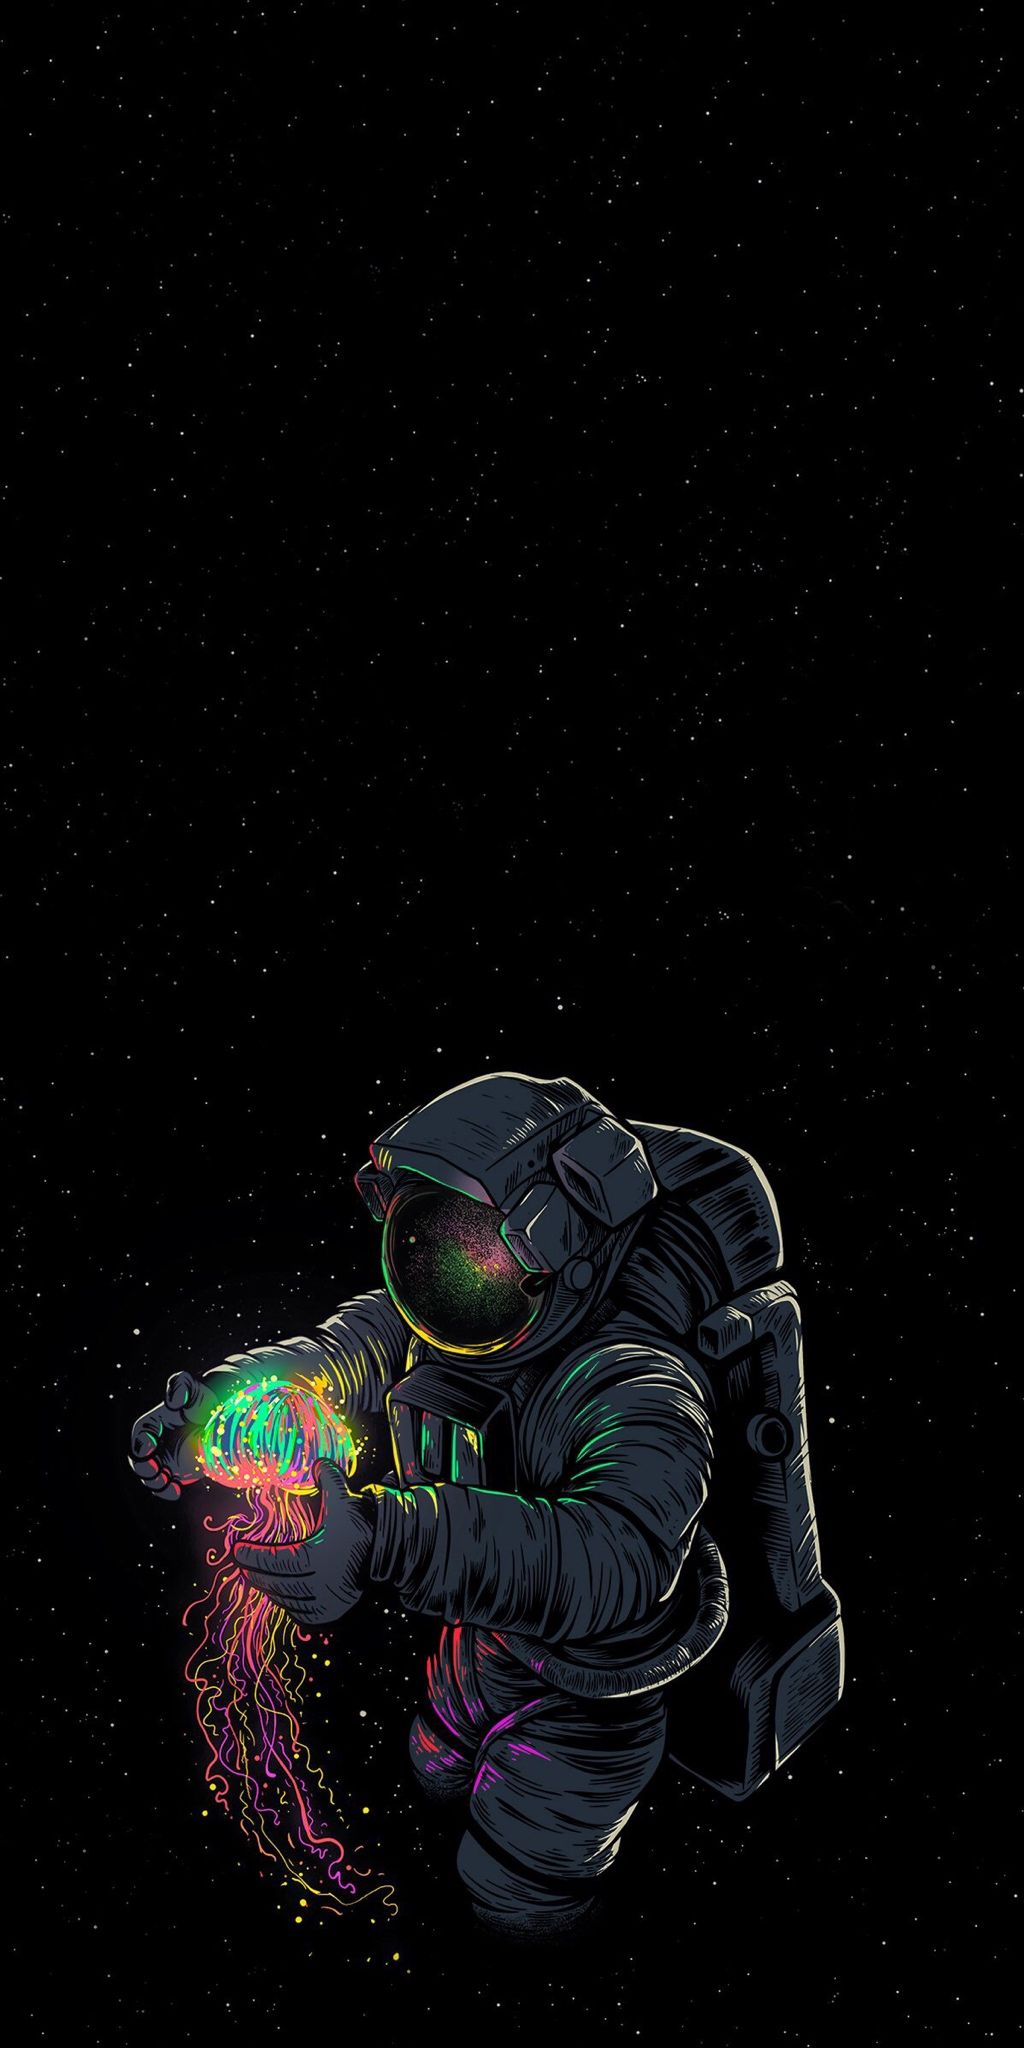 Space Astronaut Art Print by svhvisuals Space Astronaut Art Print by  svhvisuals  XSmall  Astronaut wallpaper Wallpaper iphone neon  Astronaut art